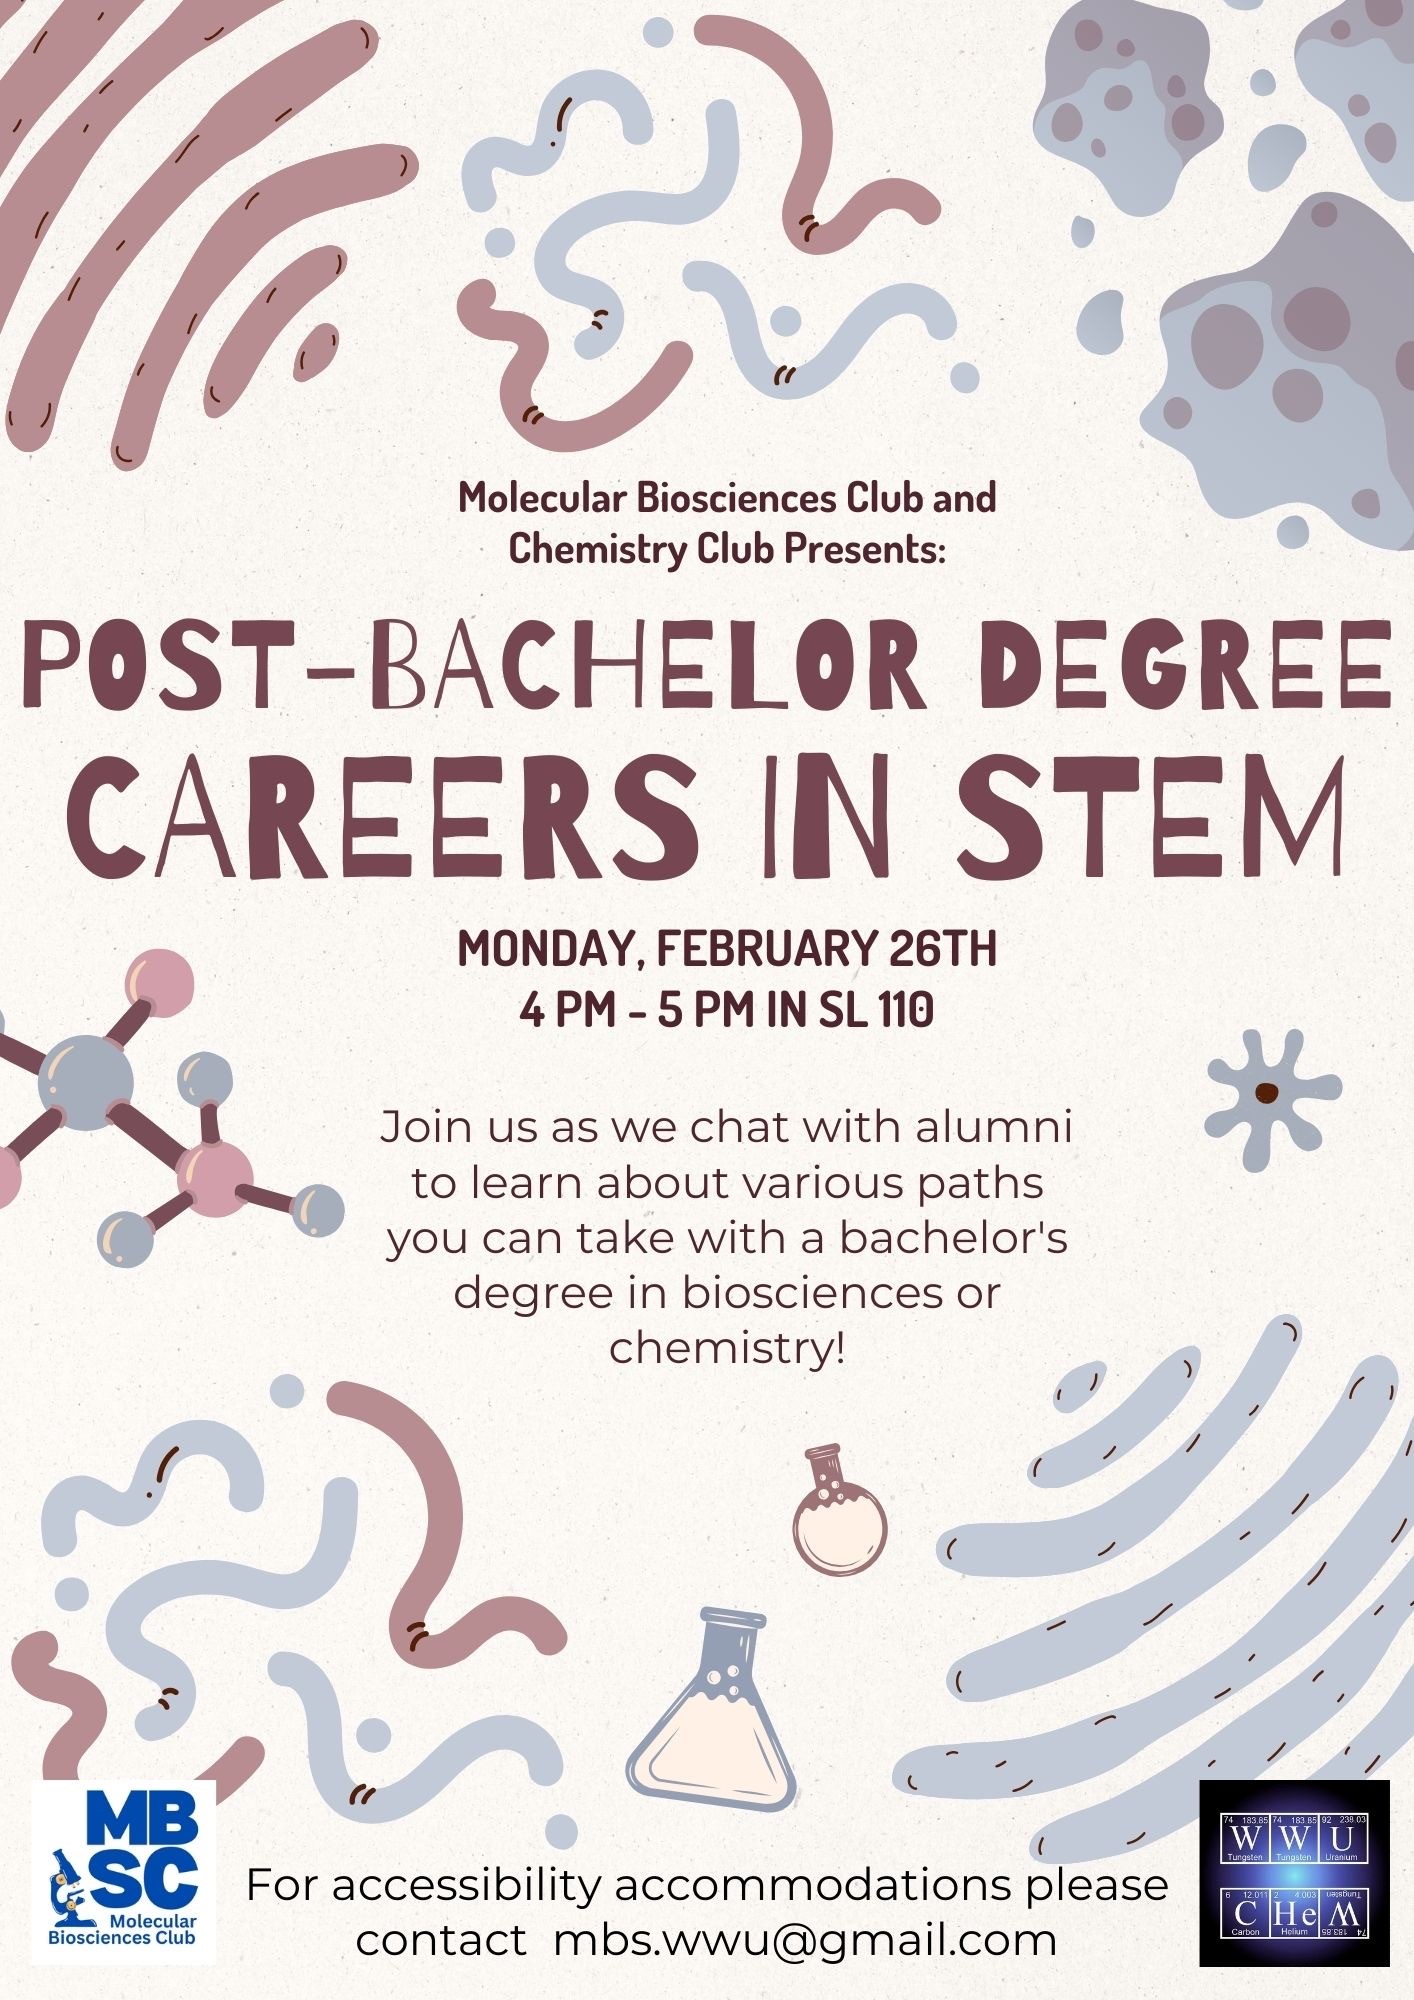 Poster with science theme graphics says Post-Bachelor Degree Careers in STEM on Monday February 26th 4-5pm in SL 110